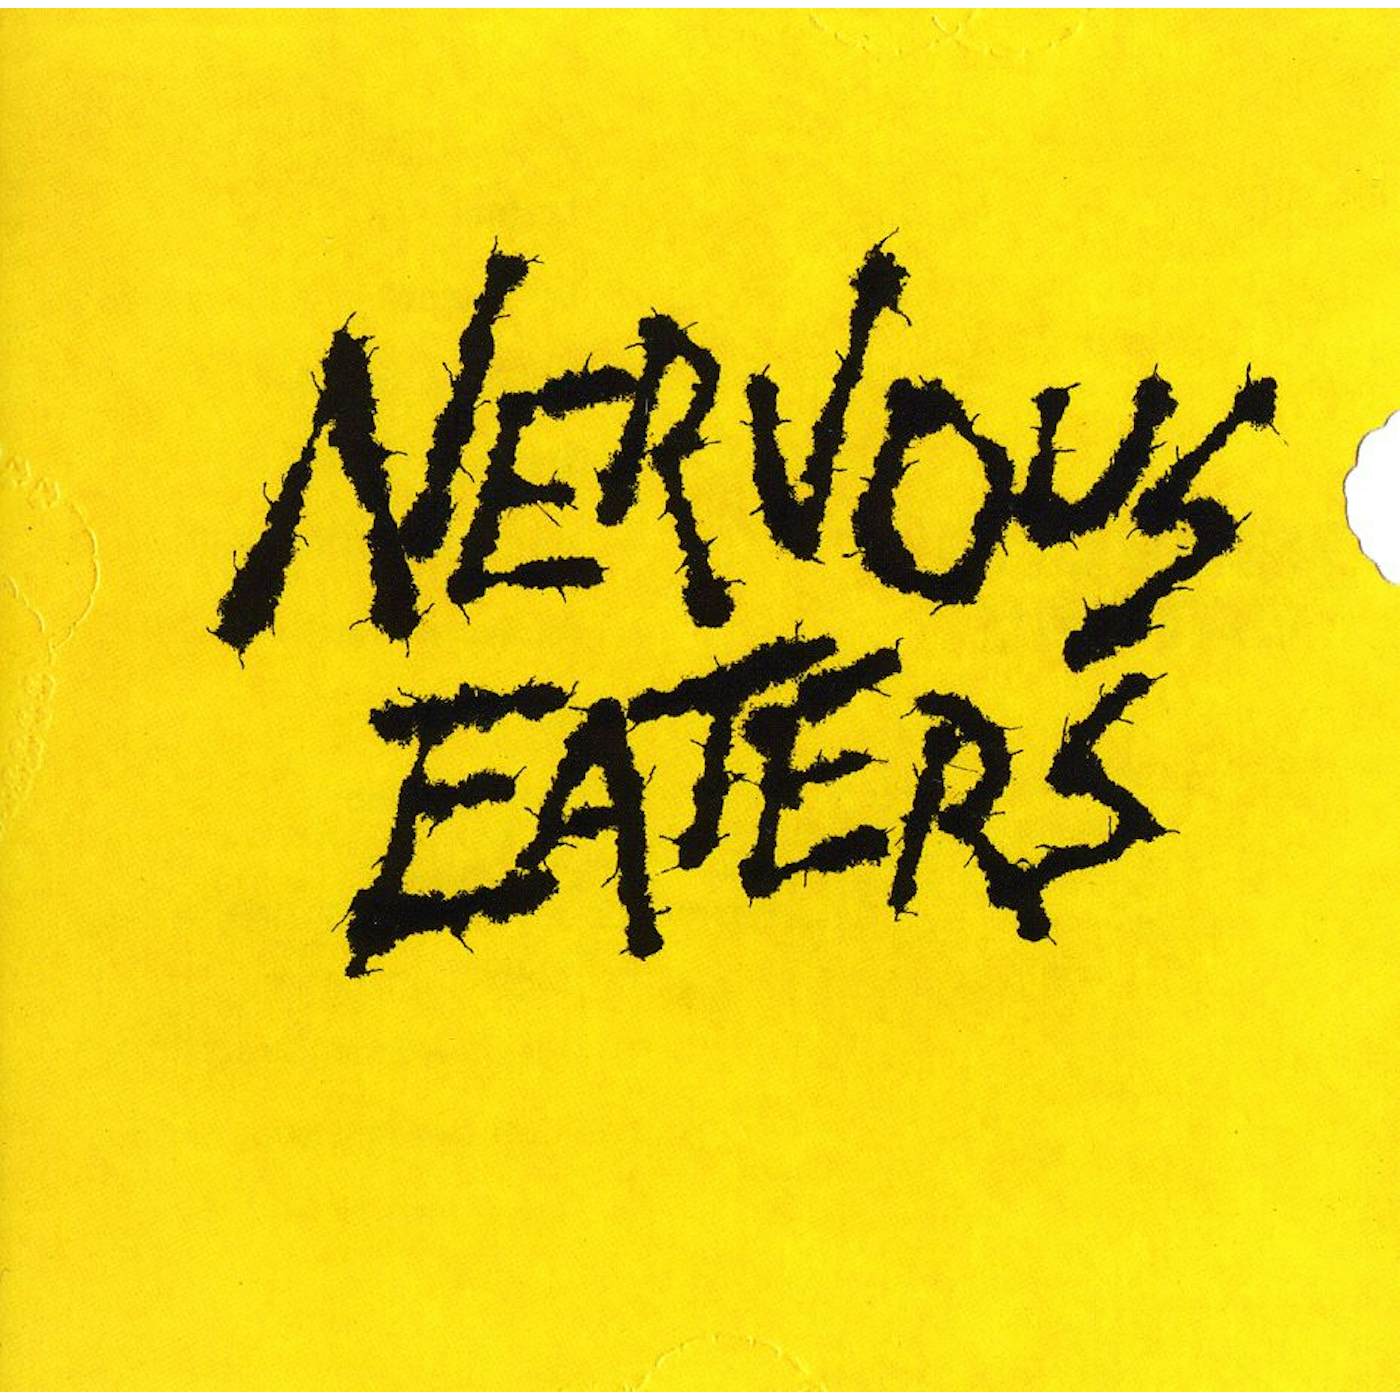 NERVOUS EATERS CD